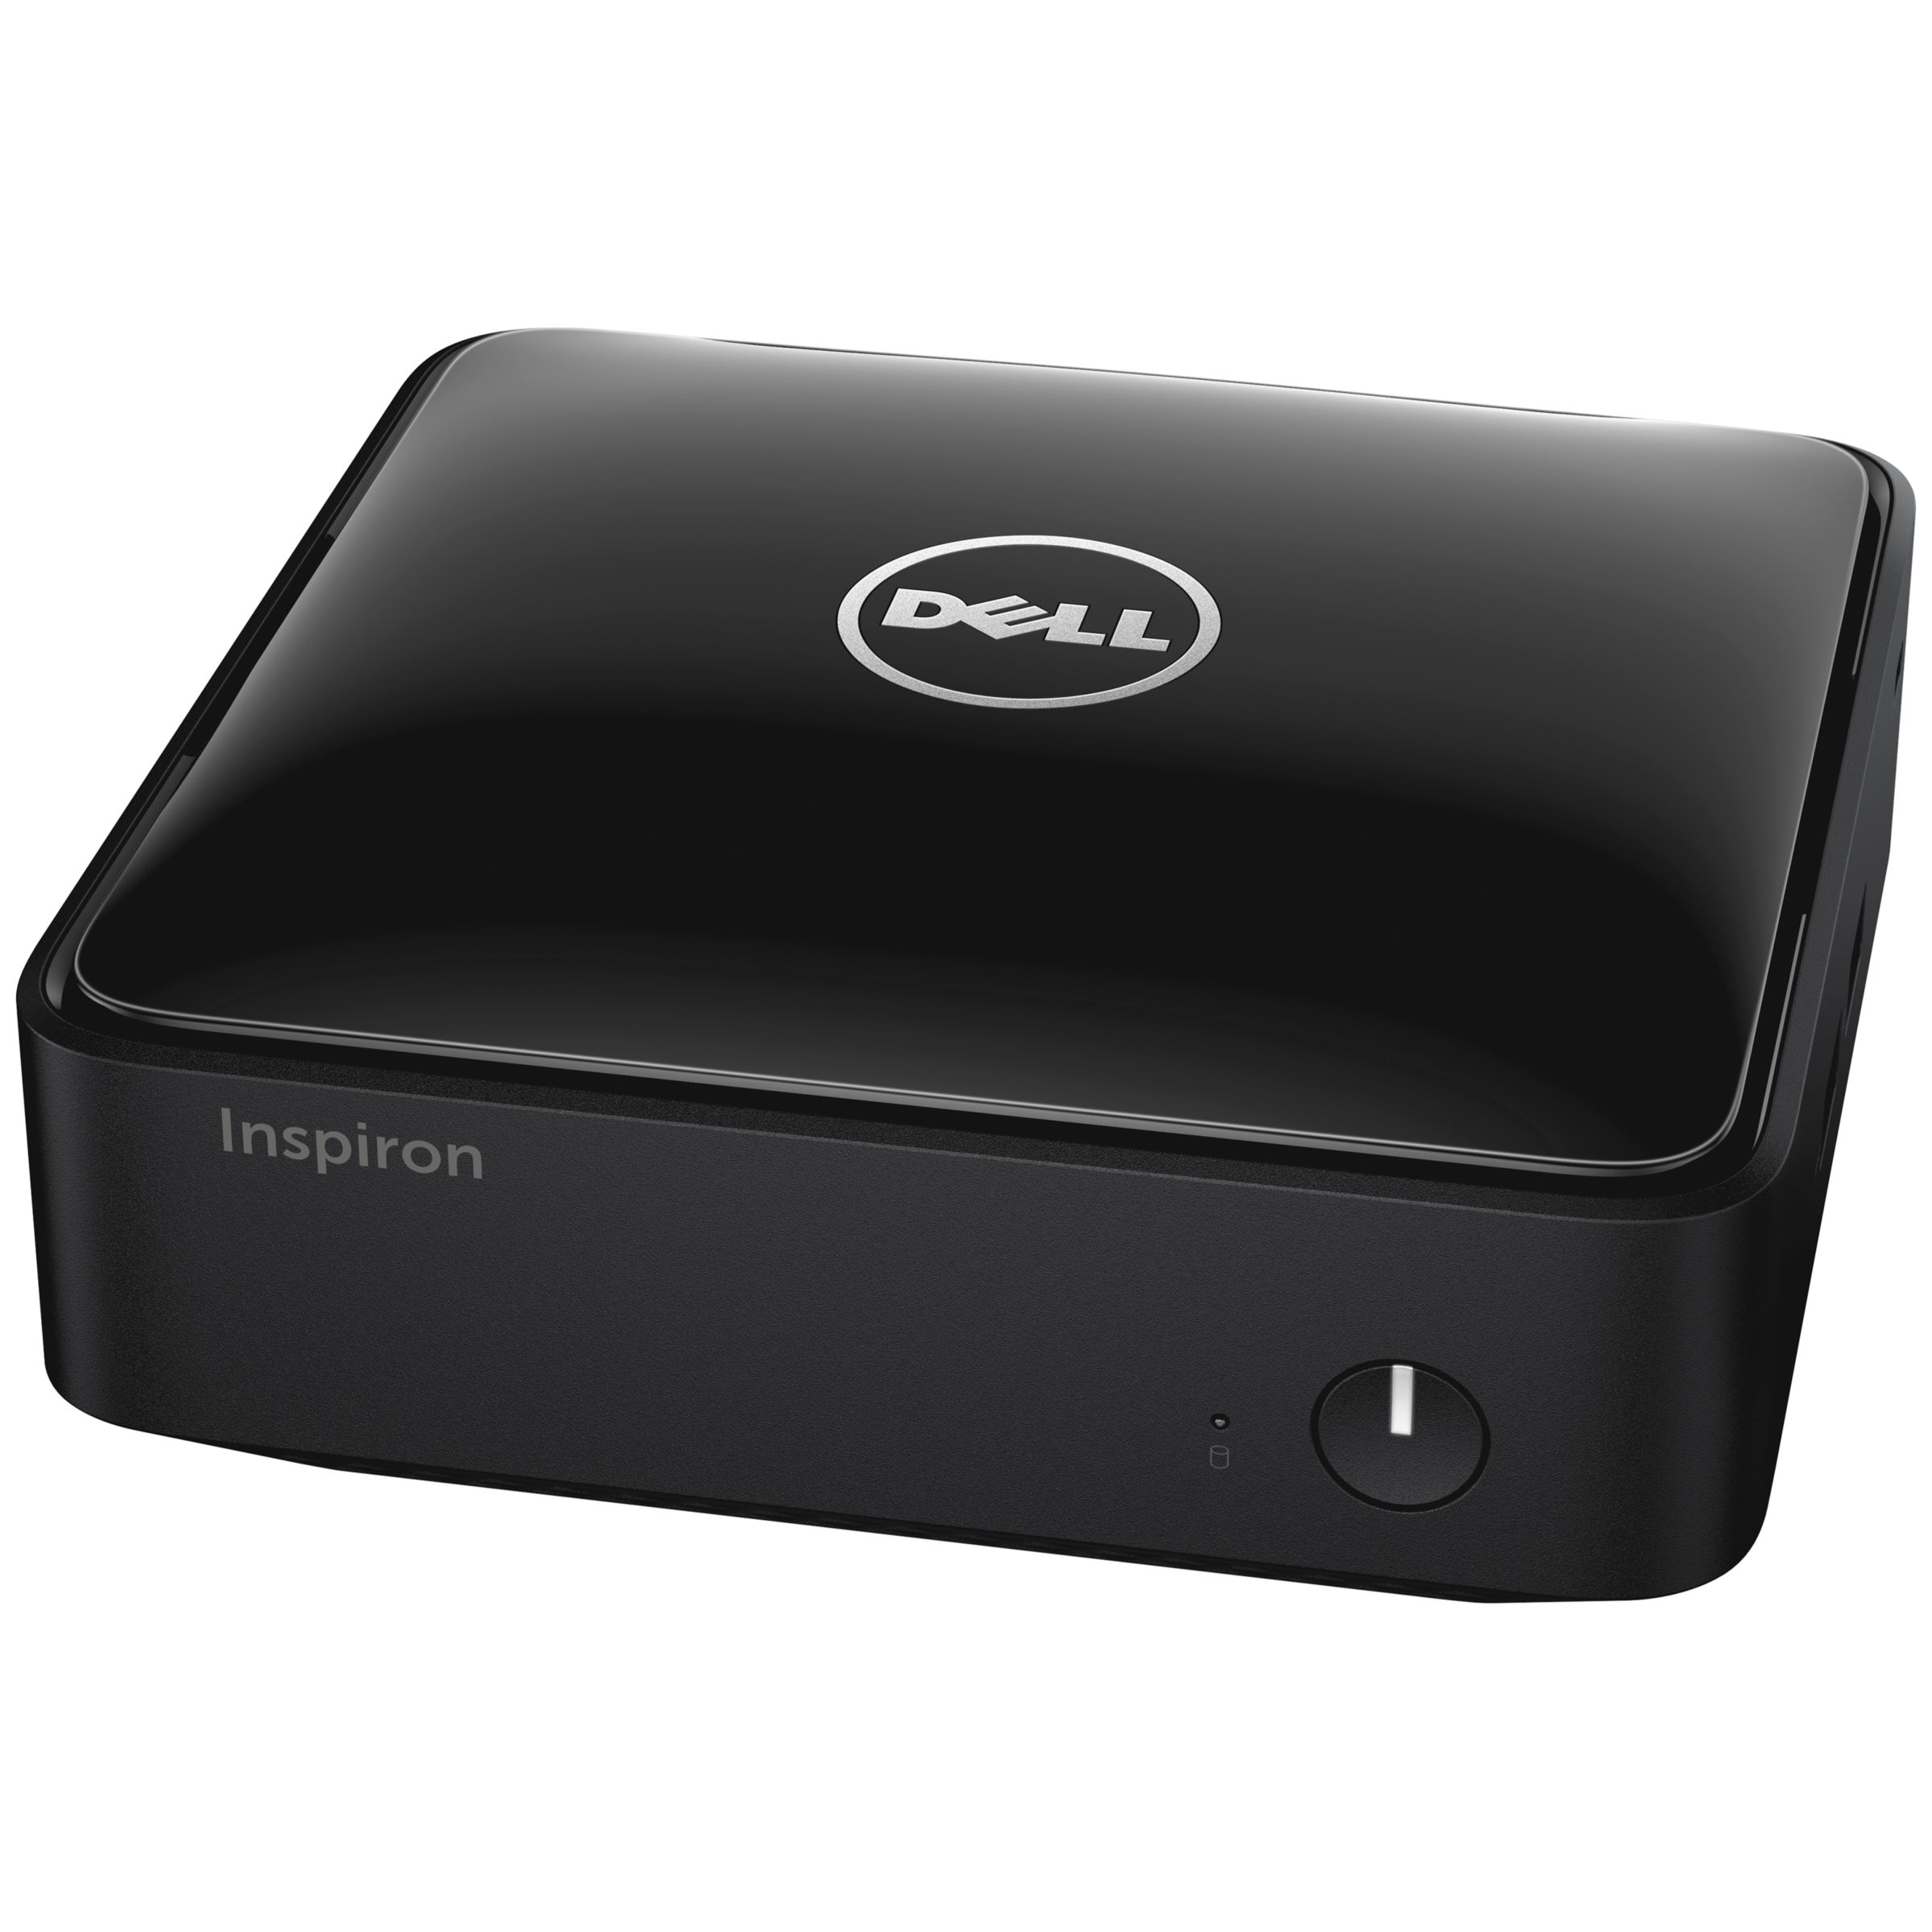 Dell Inspiron 3050 Micro Desktop with Wired KeyBoard and Mouse, Intel